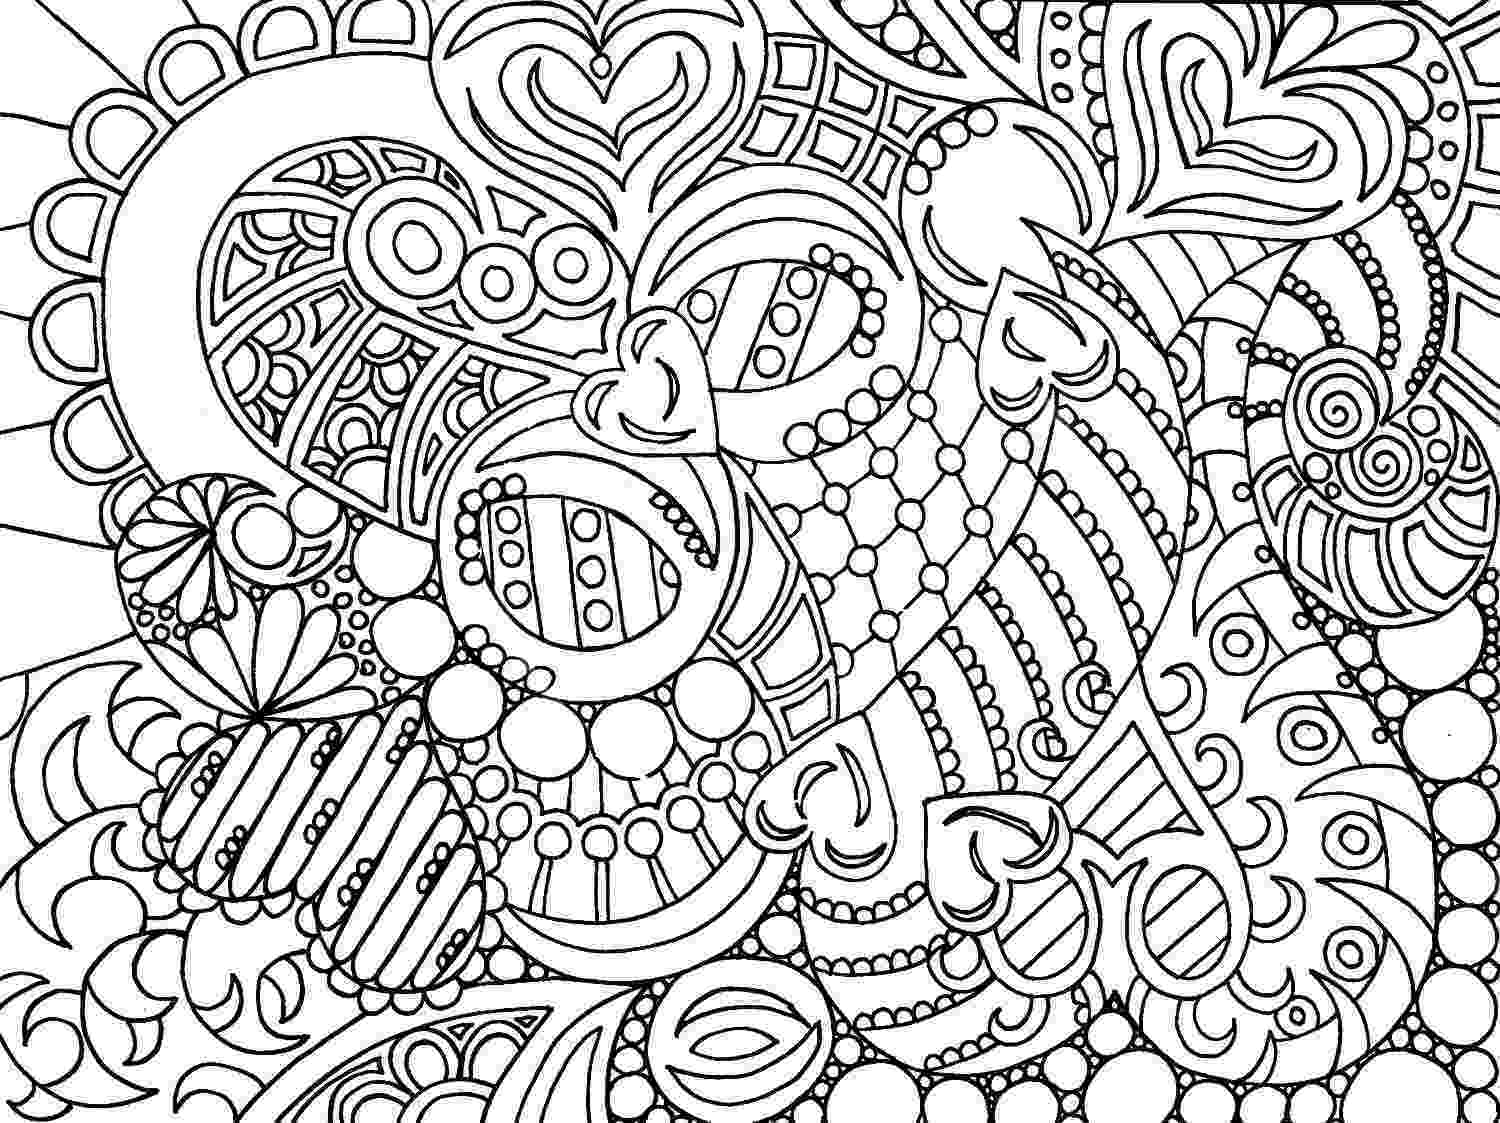 adult coloring pages abstract abstract coloring pages free large images adult and adult abstract coloring pages 